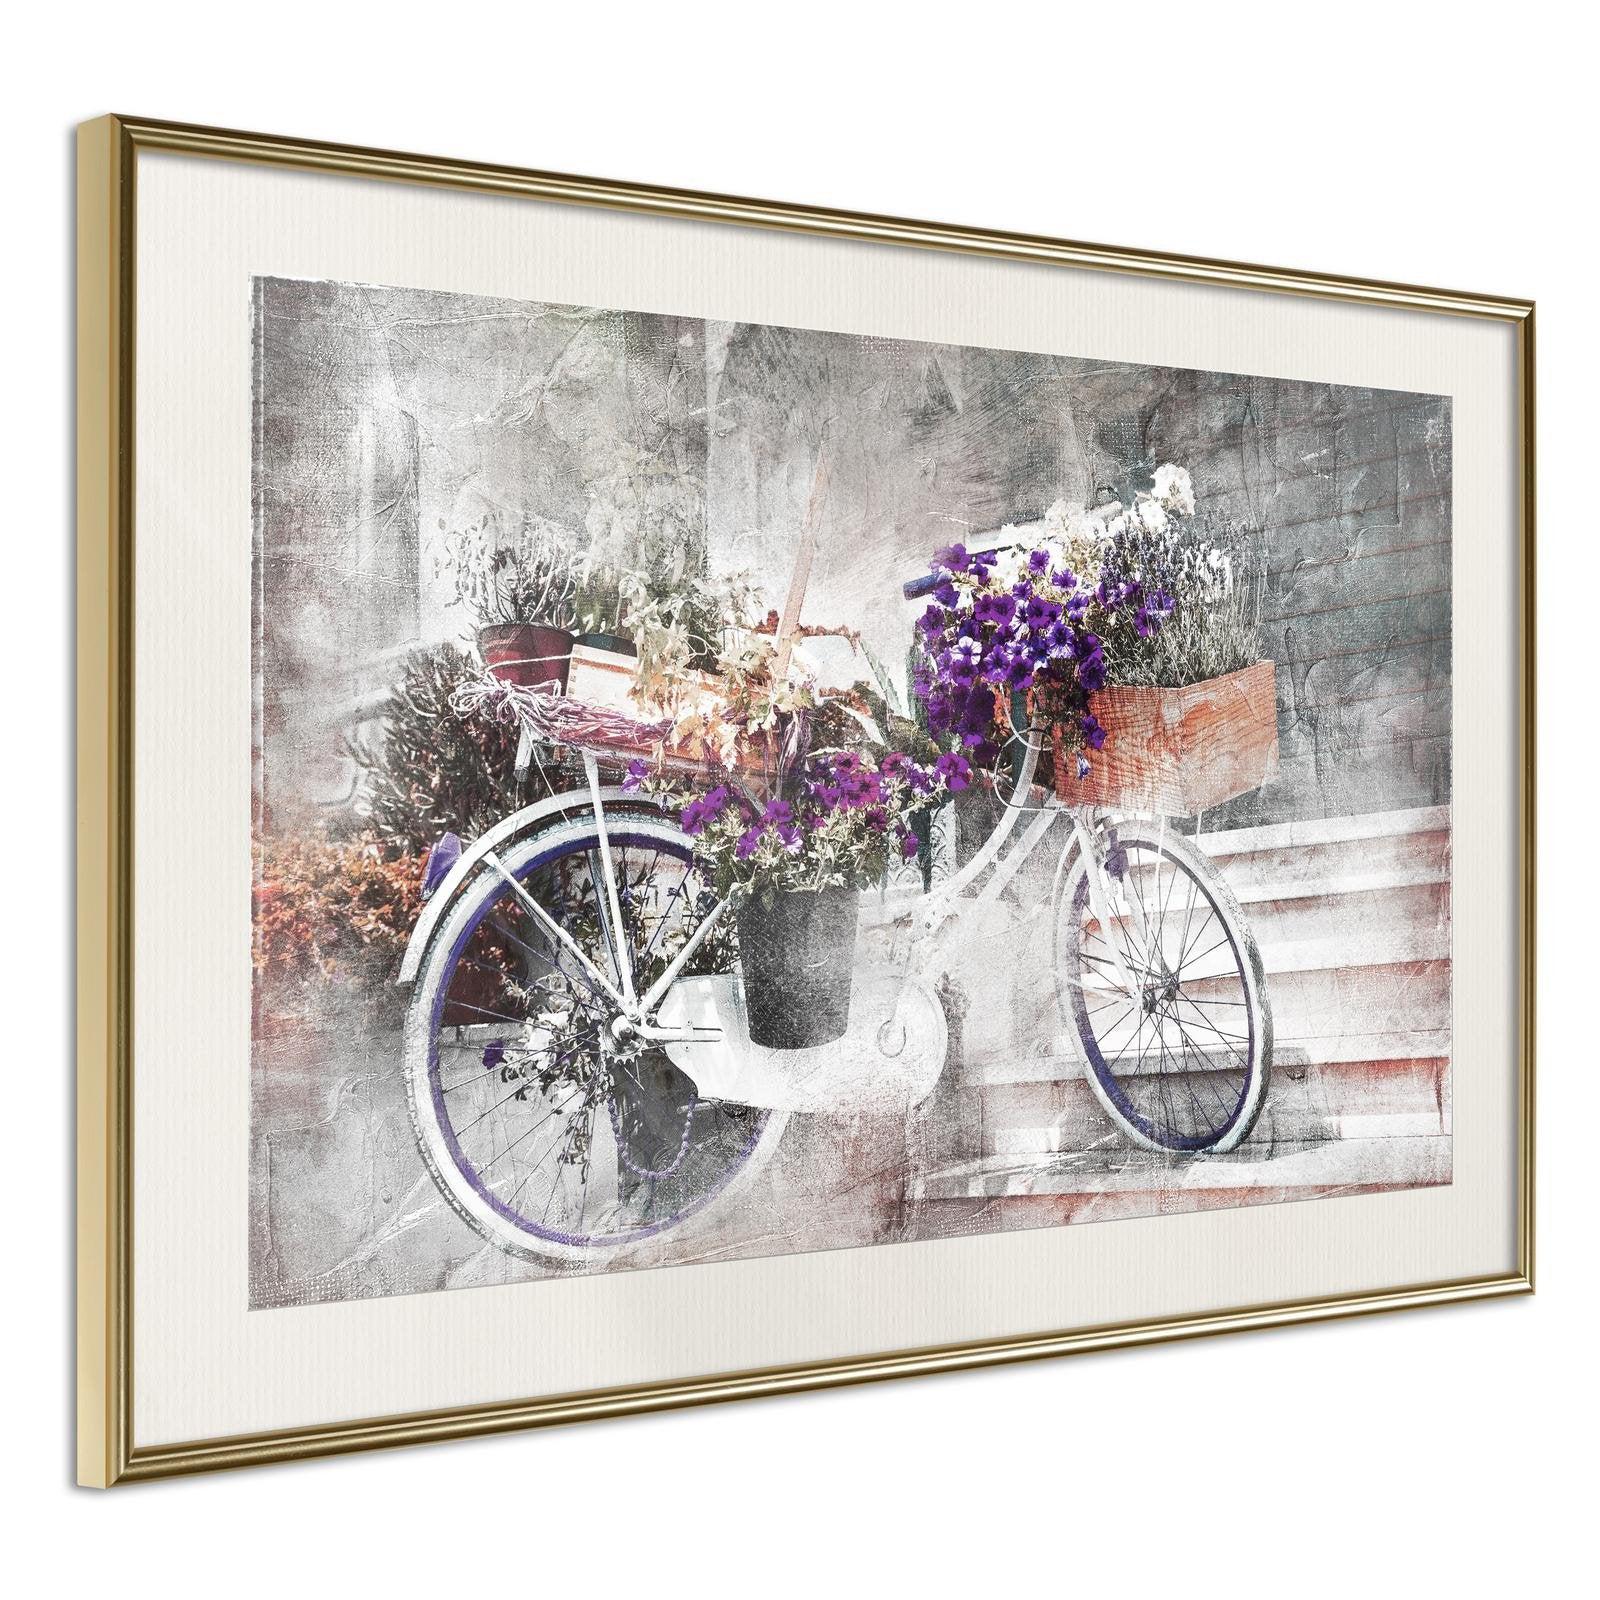 Inramad Poster / Tavla - Flower Delivery-Poster Inramad-Artgeist-30x20-Guldram med passepartout-peaceofhome.se